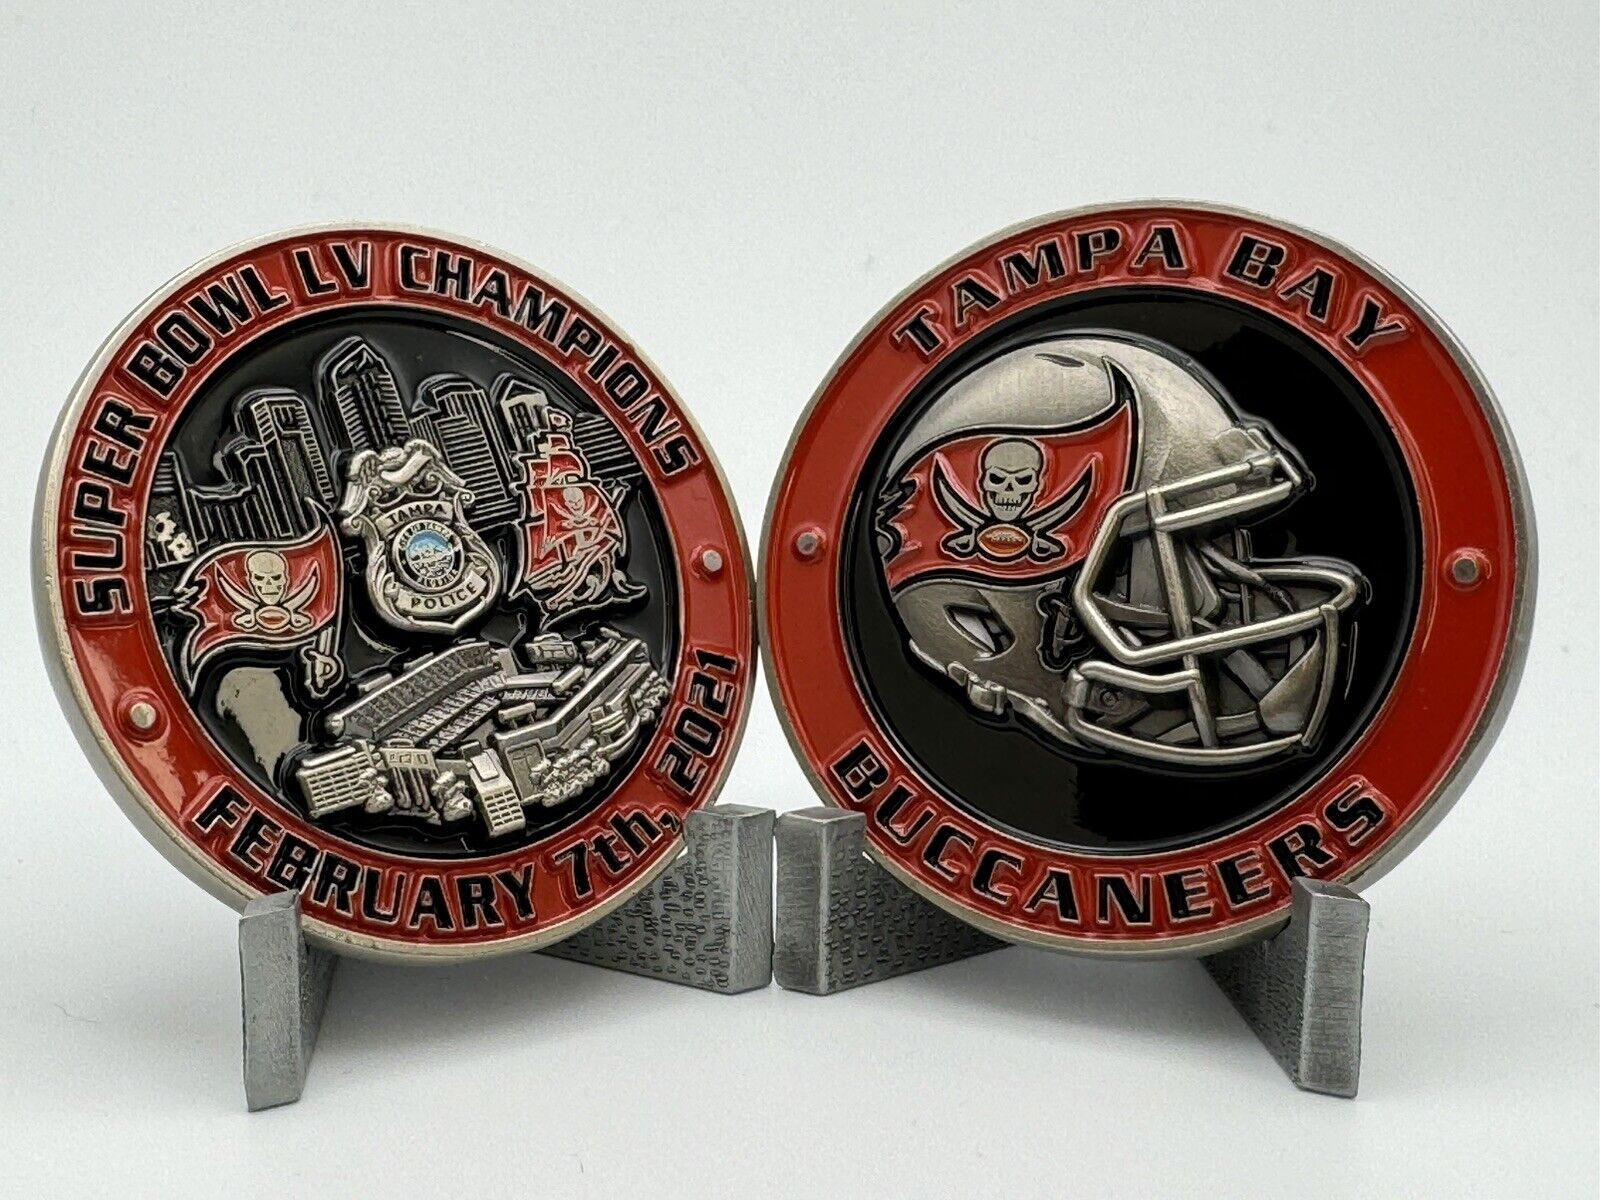 🔥 Sought After Tampa Police (TPD) Super Bowl Challenge Coin